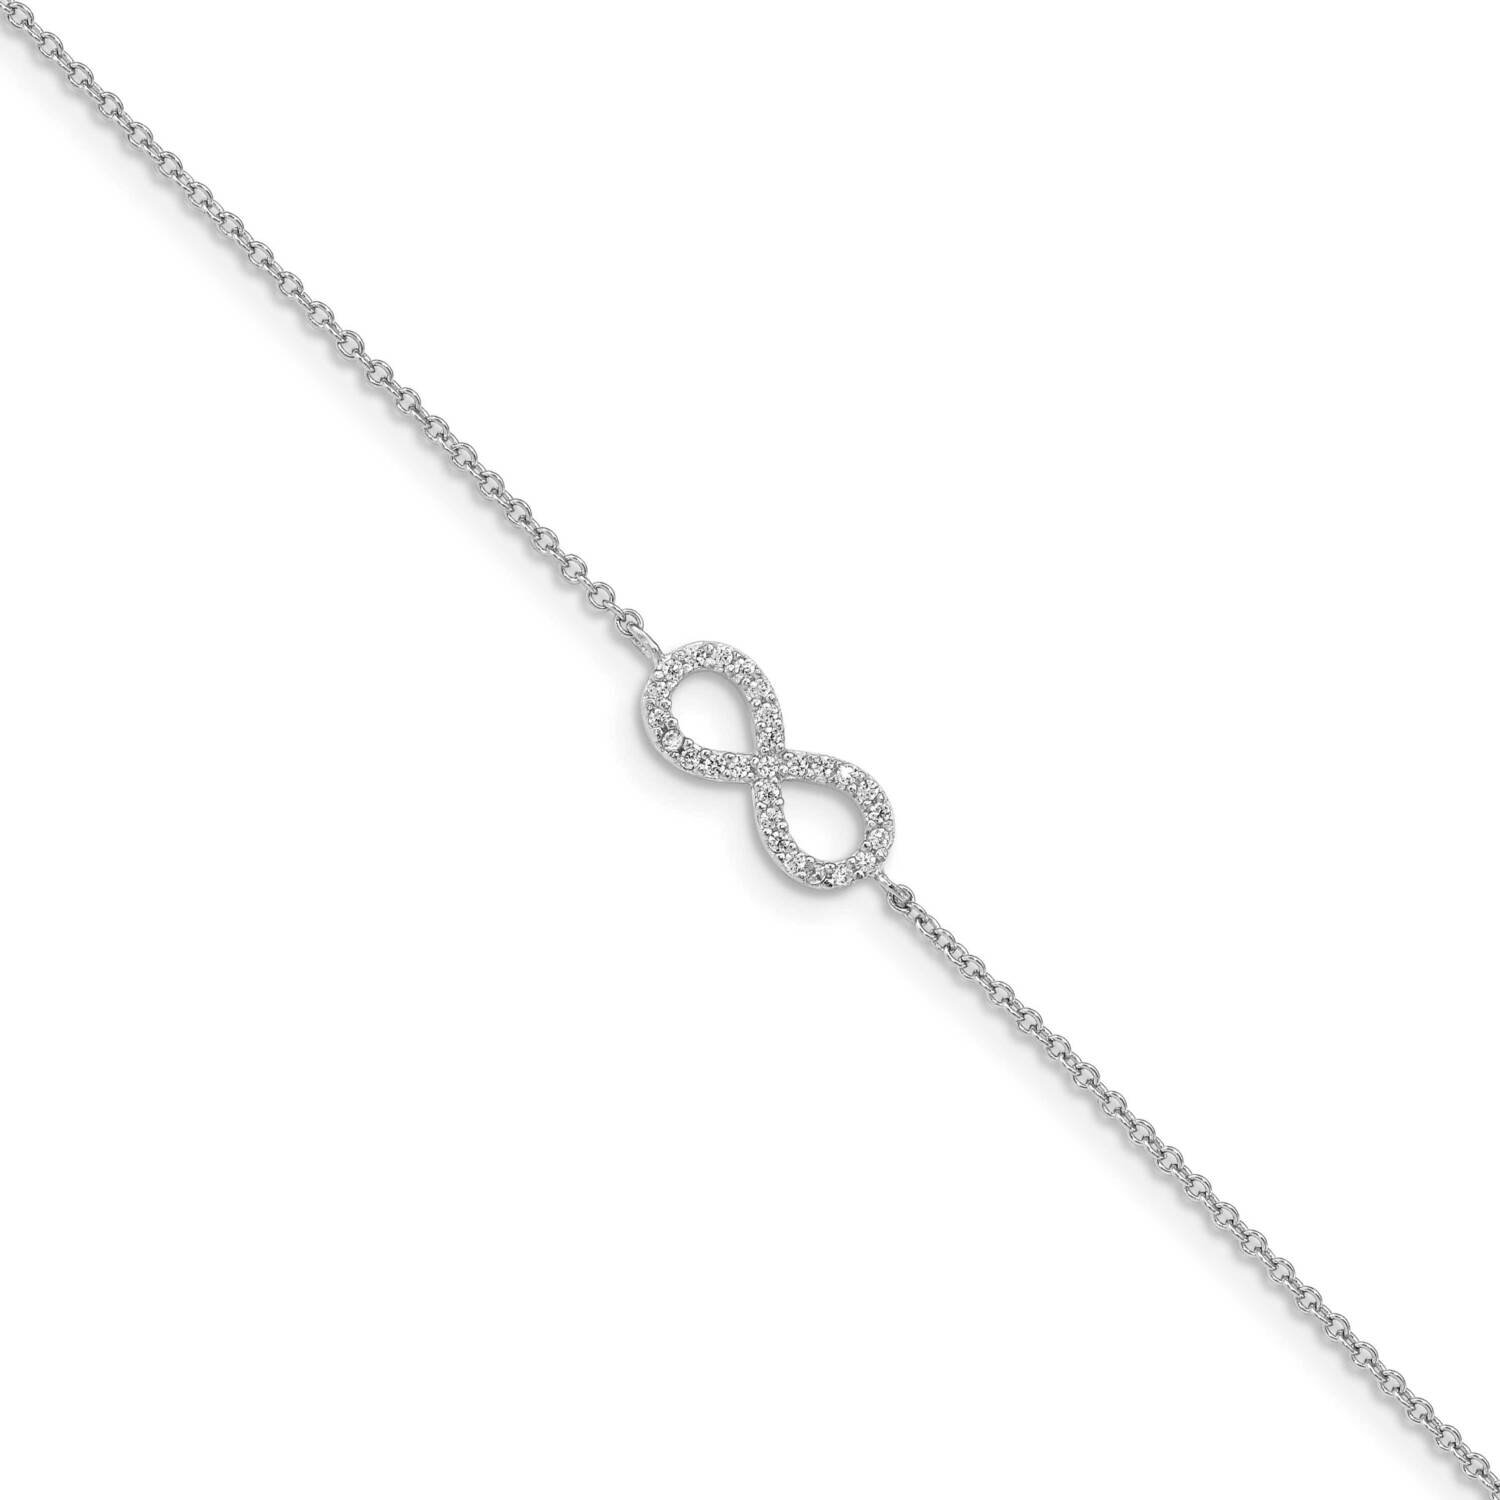 CZ Diamond Infinity Symbol 7 Inch with 1 Inch Extender Bracelet Sterling Silver Rhodium-plated QCM1084-7